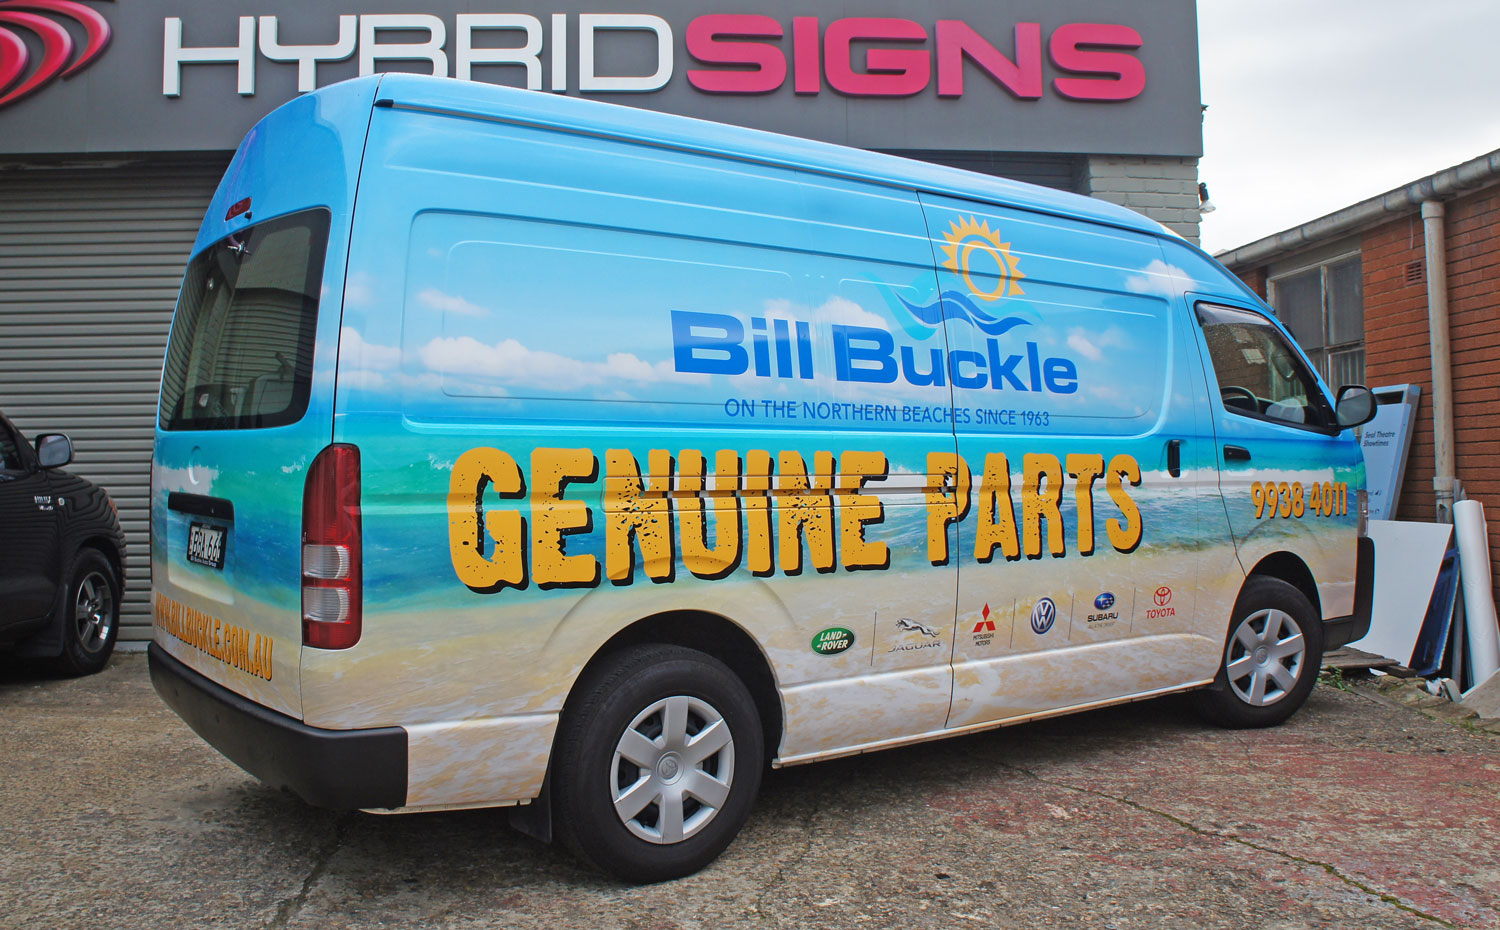 FULL Wraps For Vehicles, Sydney on the northern beaches by Hybrid Signs